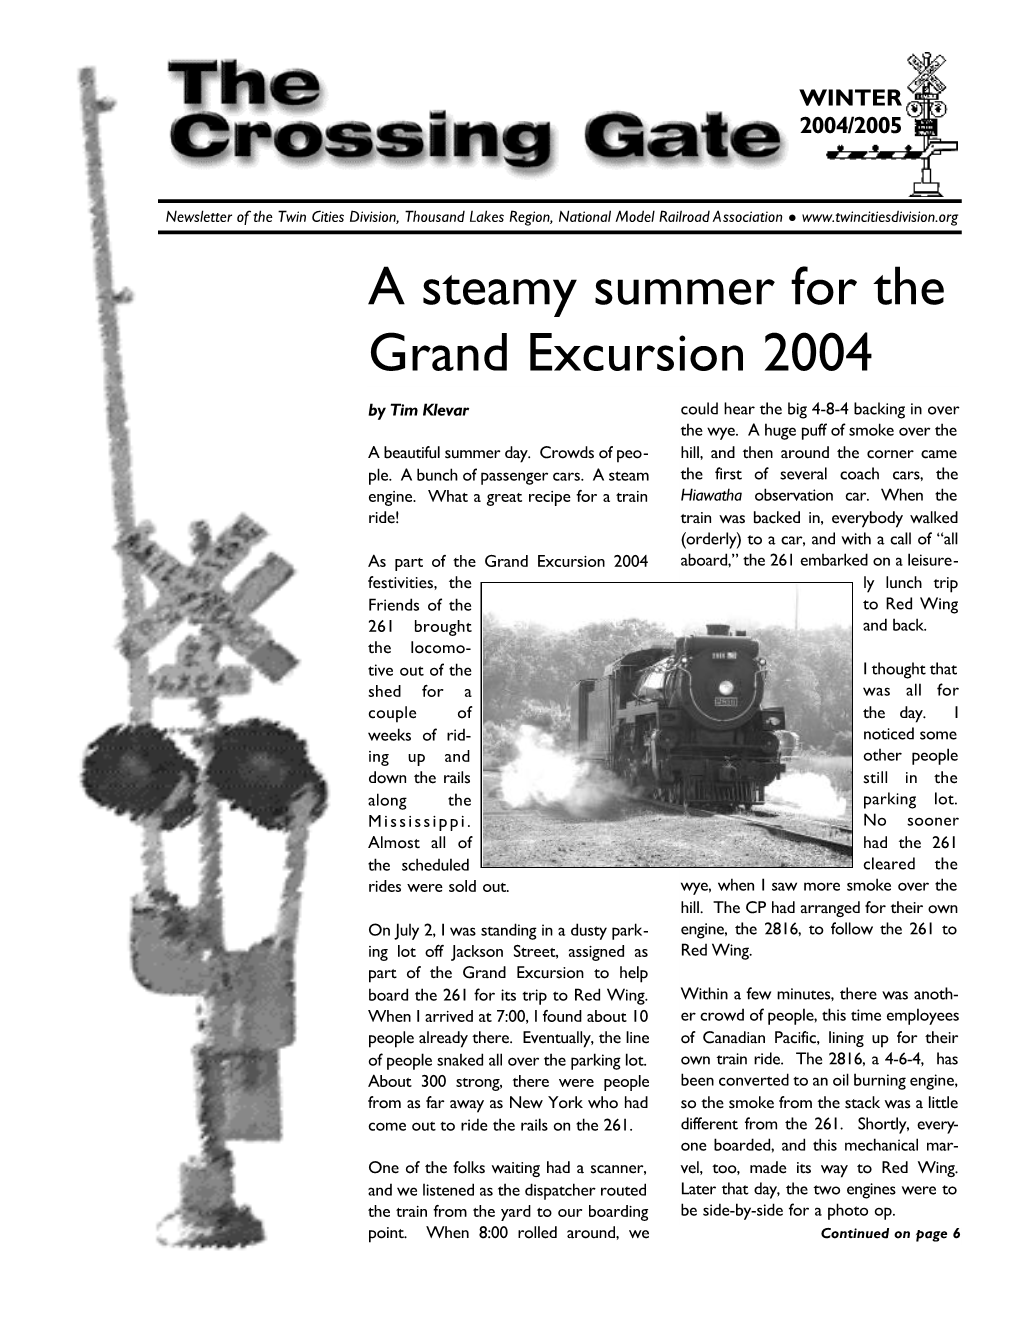 A Steamy Summer for the Grand Excursion 2004